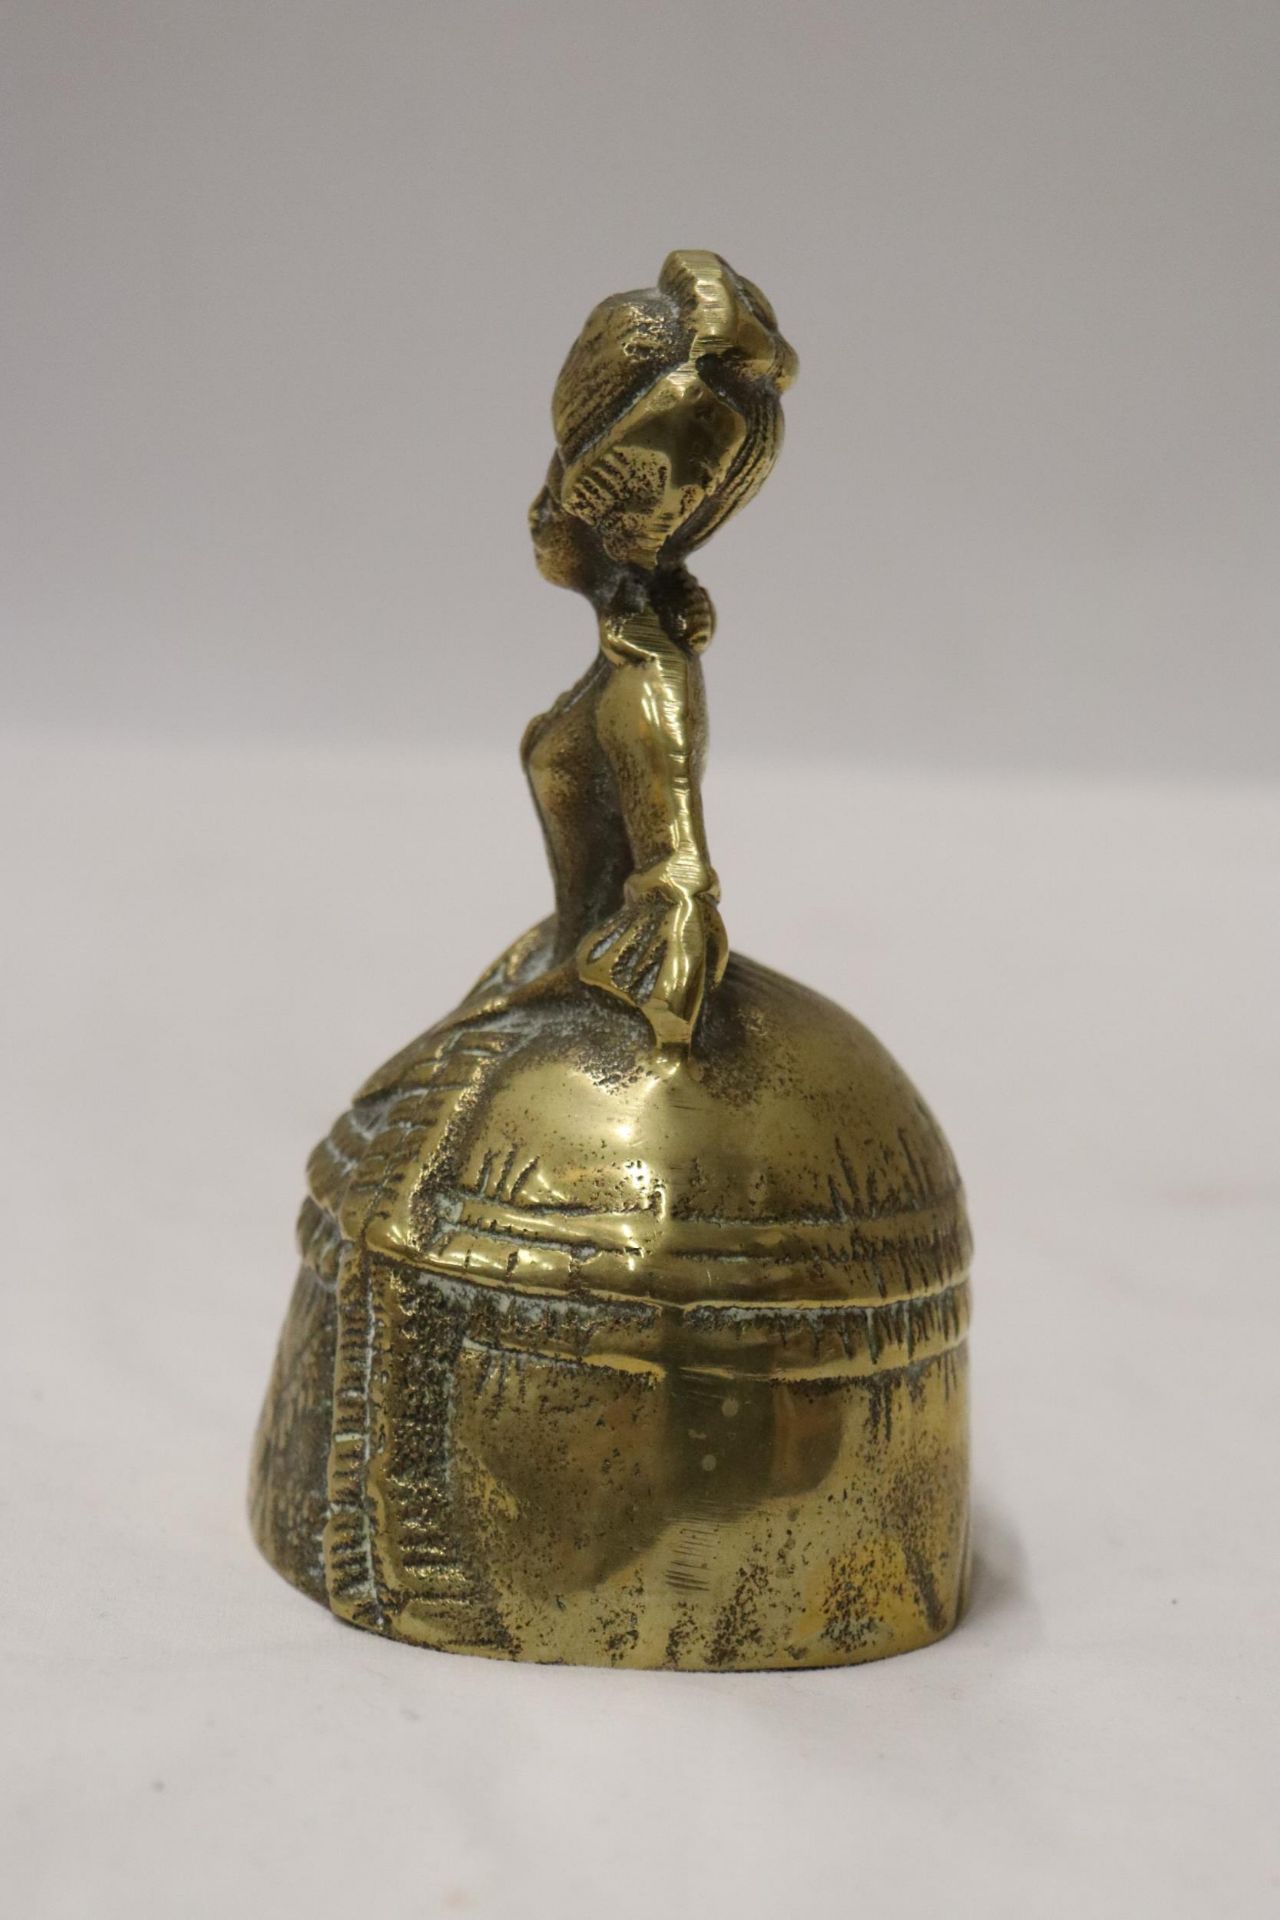 A VINTAGE BRASS BELL MODELLED AS A VICTORIAN WOMAN - Image 3 of 6